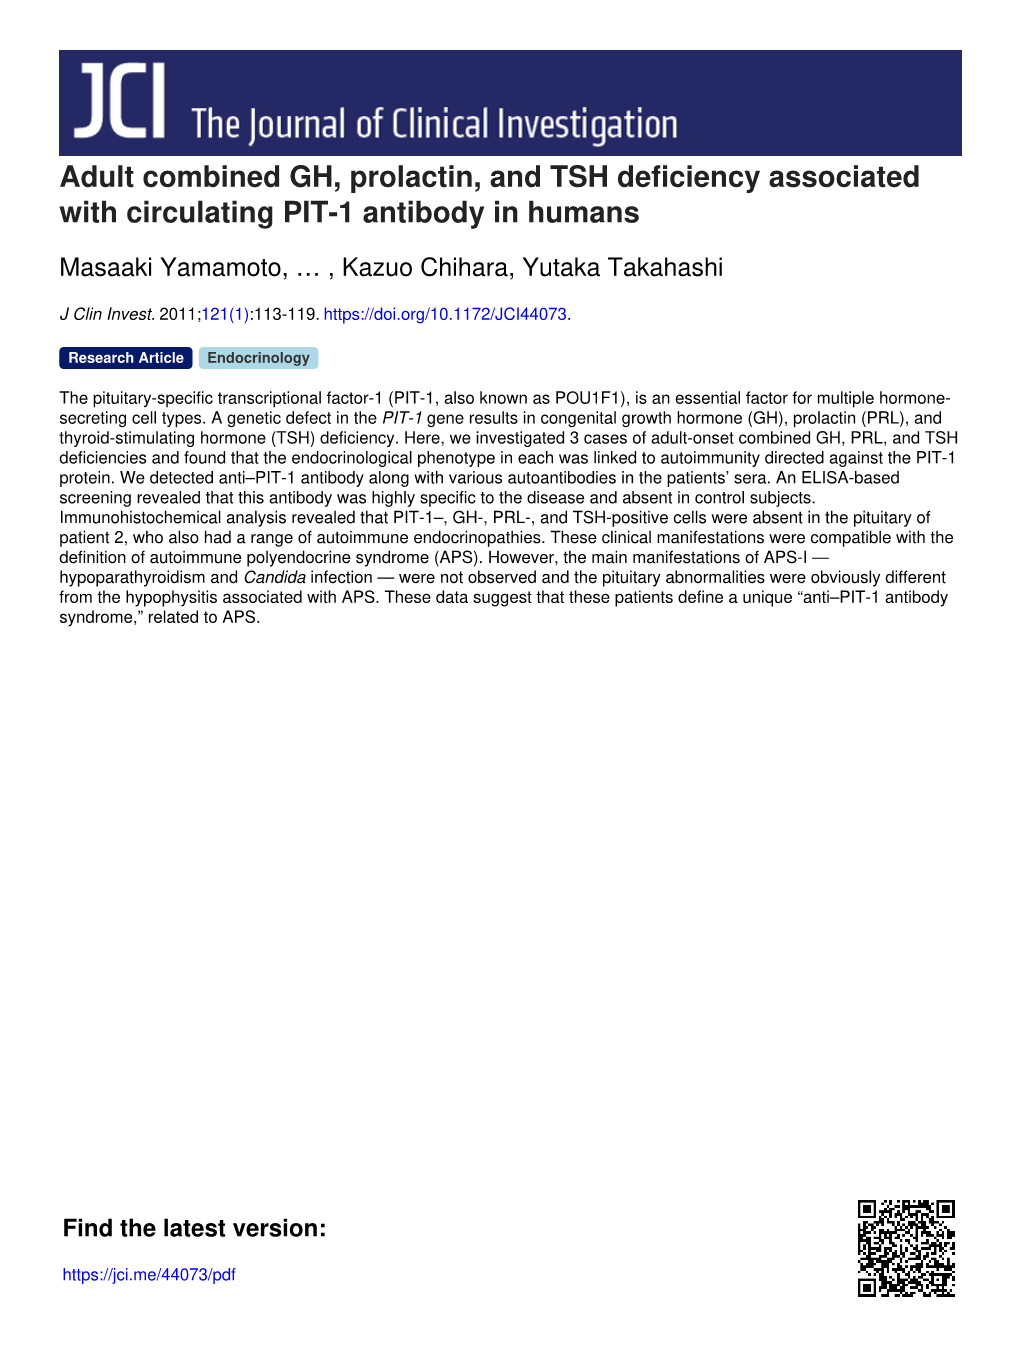 Adult Combined GH, Prolactin, and TSH Deficiency Associated with Circulating PIT-1 Antibody in Humans